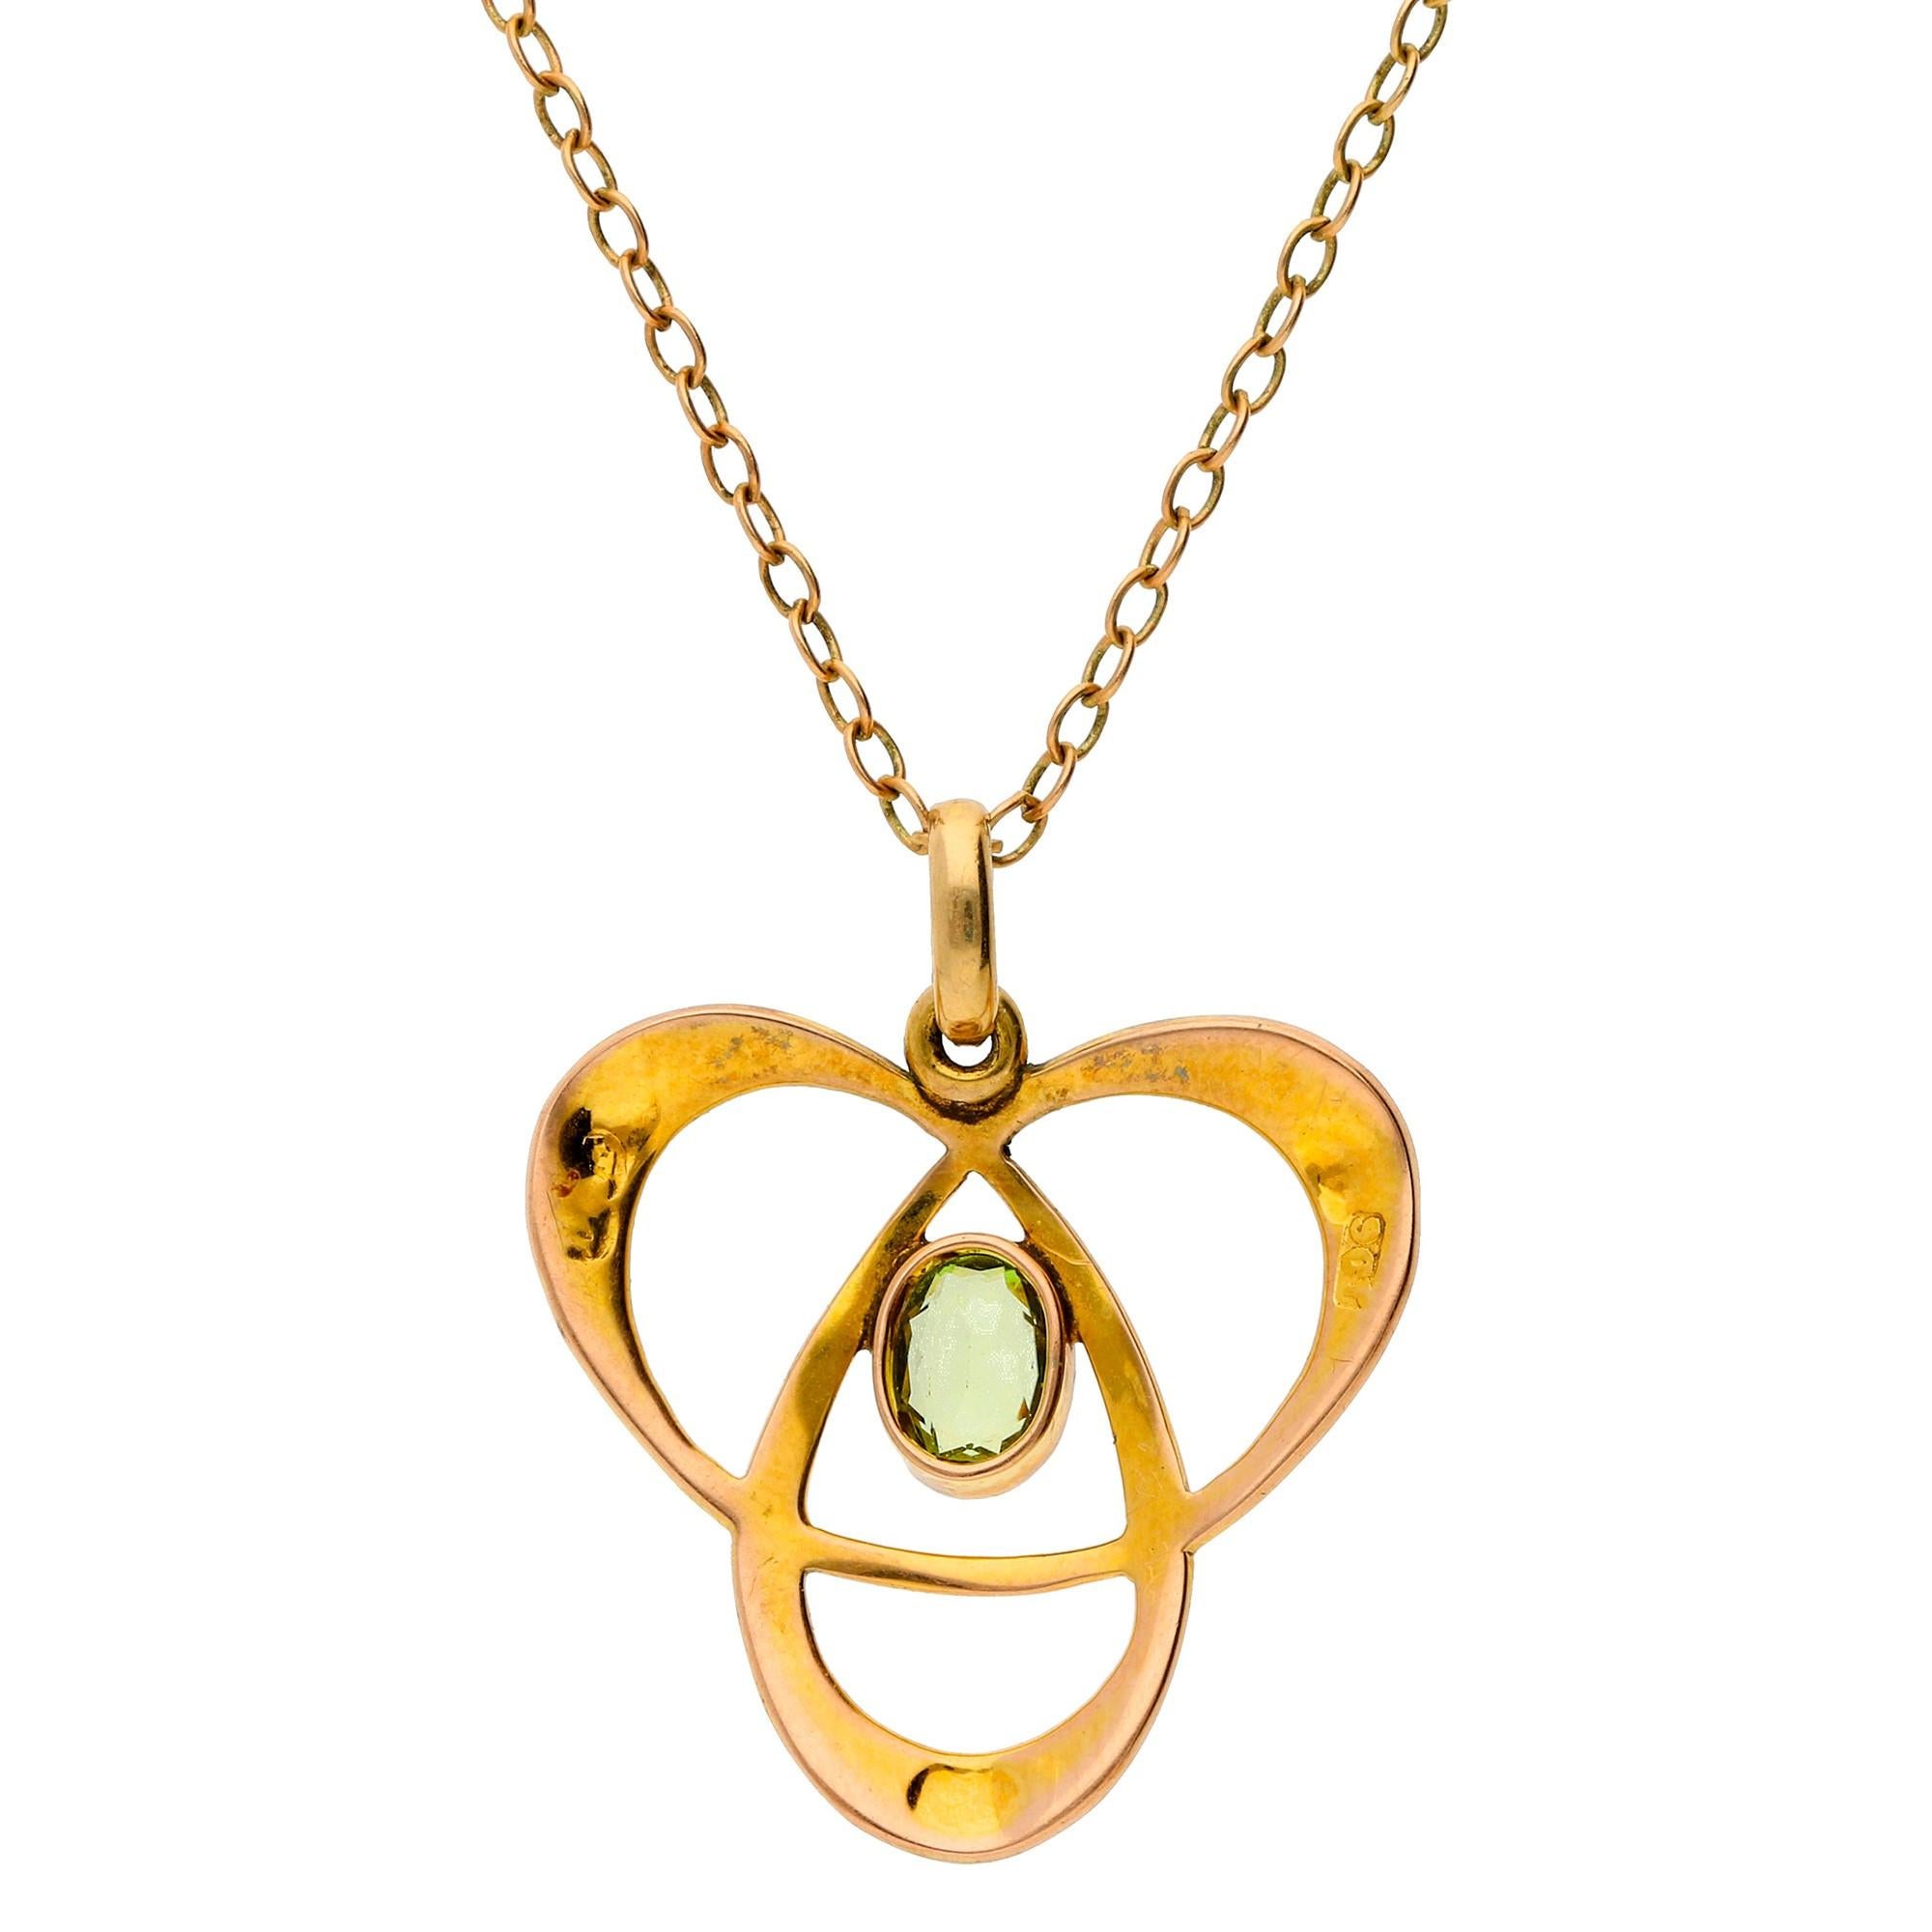 This beautiful early 20th century peridot pendant. The delicious peridot, with a striking scrolling curved surround, suspended from a classic trace chain.

A lovely gift of a August birthday, or simply a special occasion!

Paired with a lovely 9ct